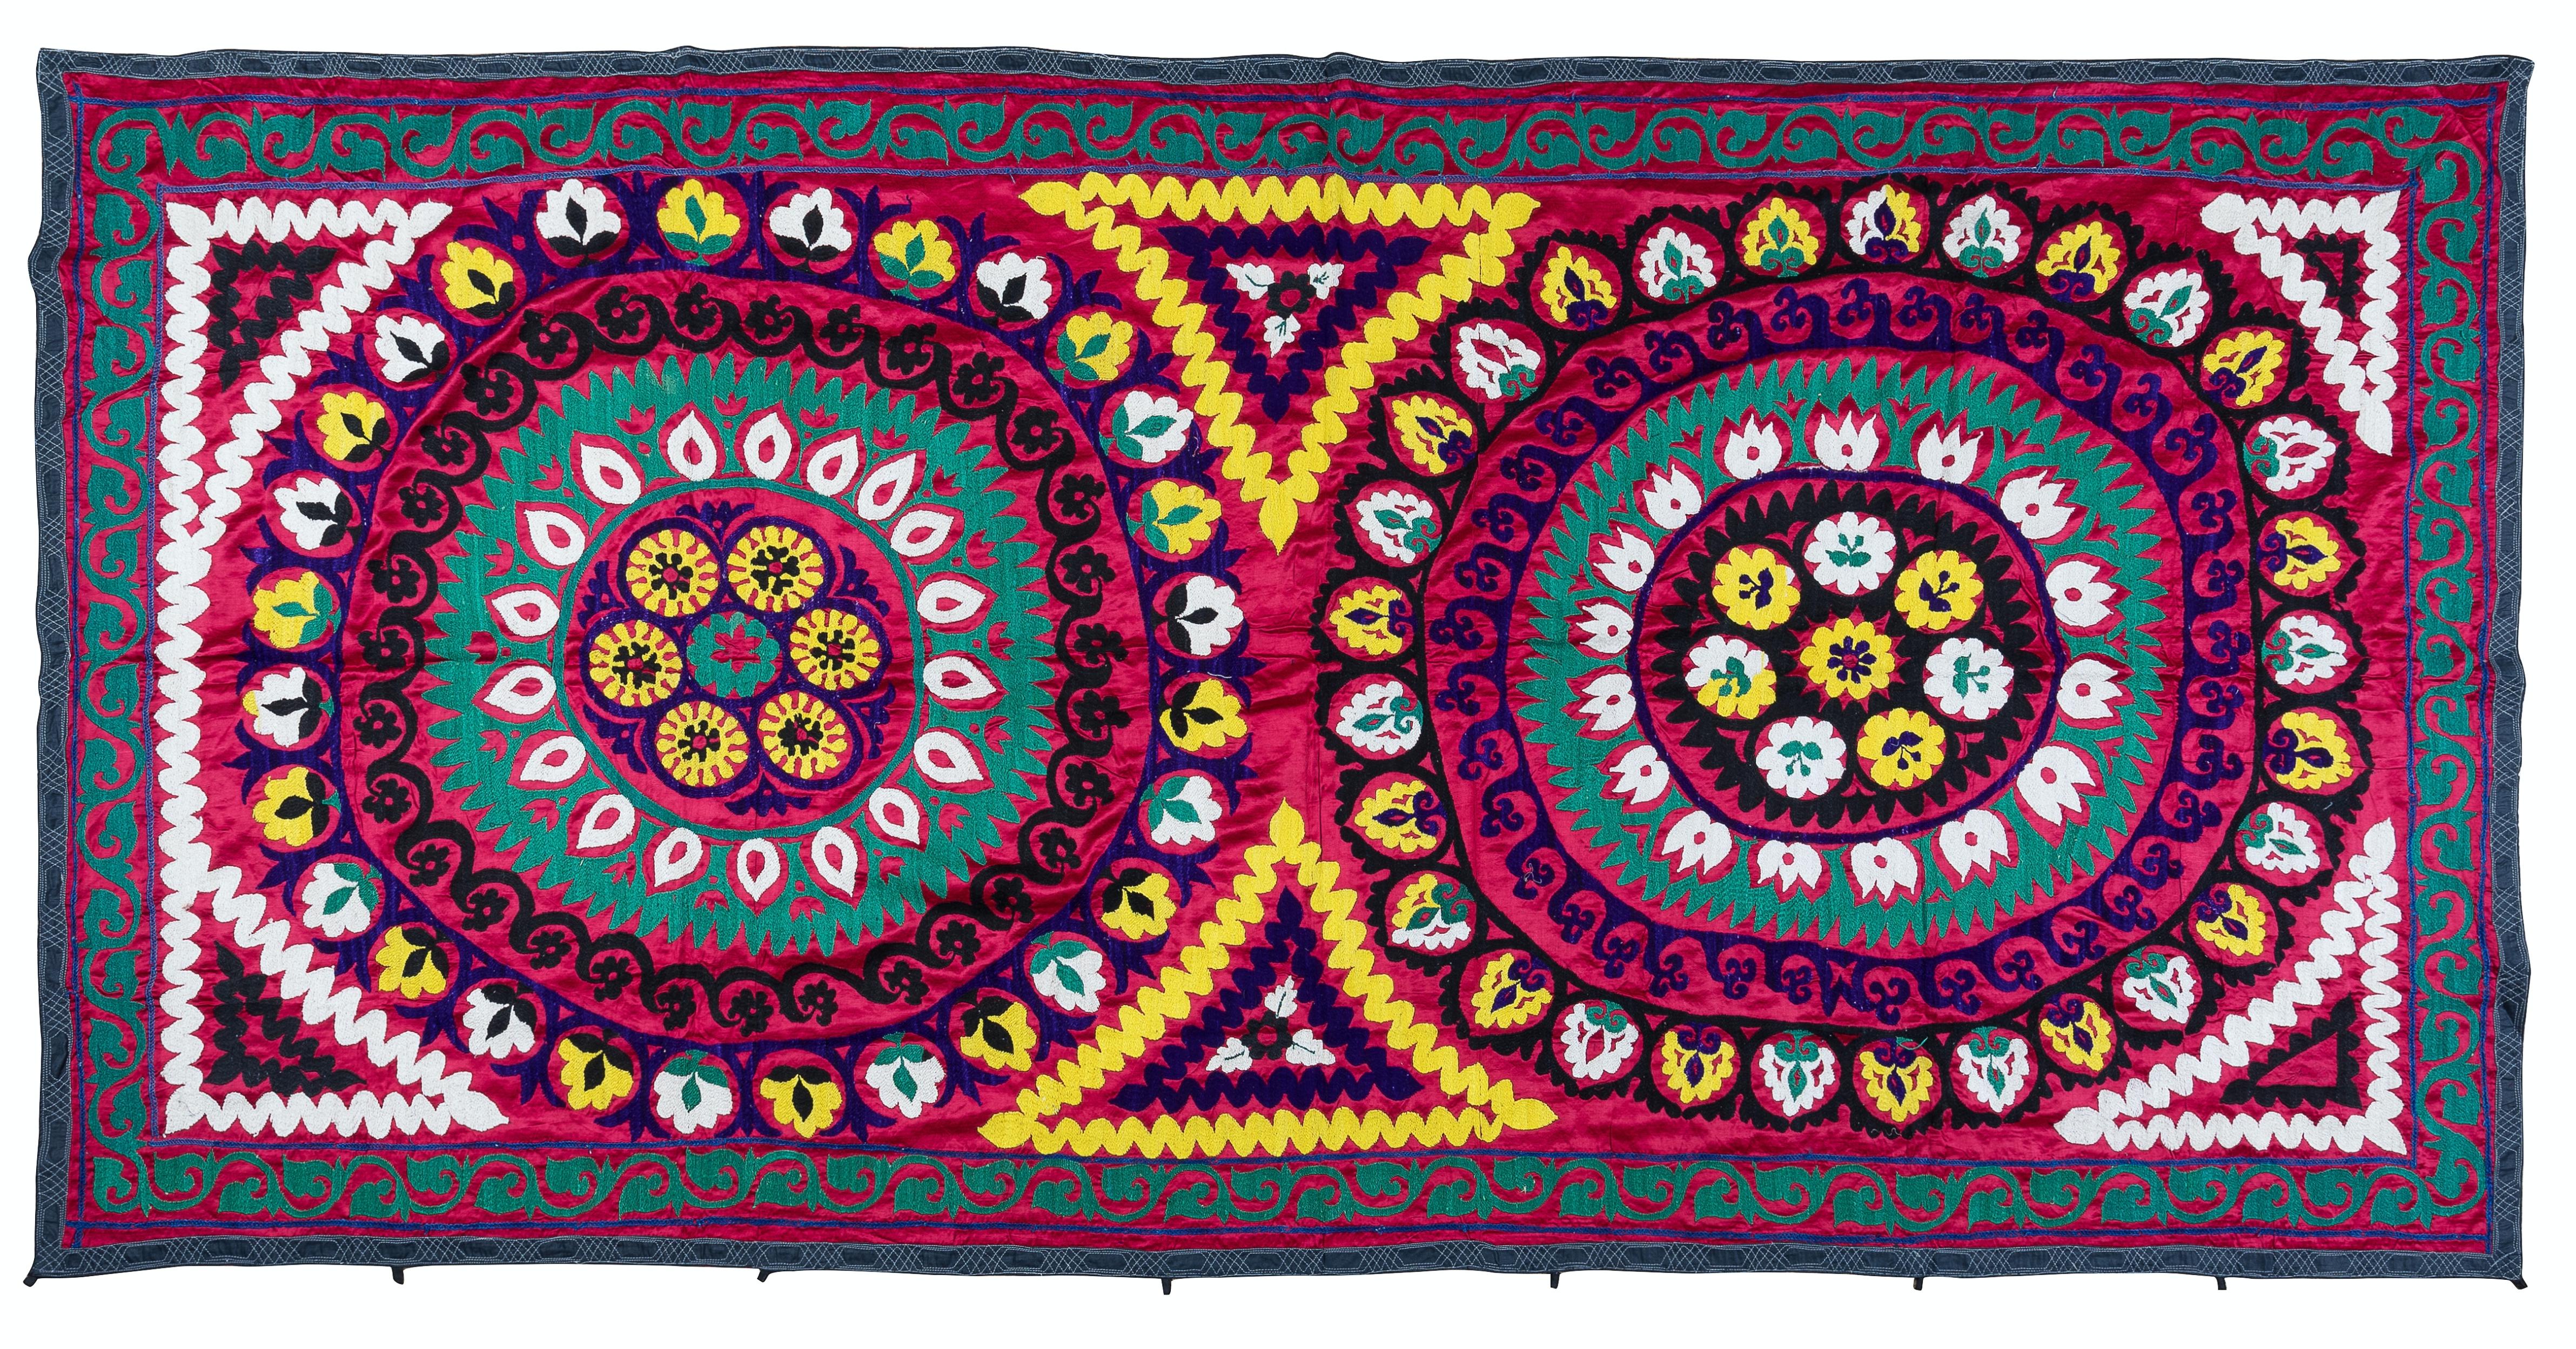 20th Century 4.7x9.6 ft Vintage Suzani Fabric Wall Hanging, Hand Embroidered Cotton Bed Cover